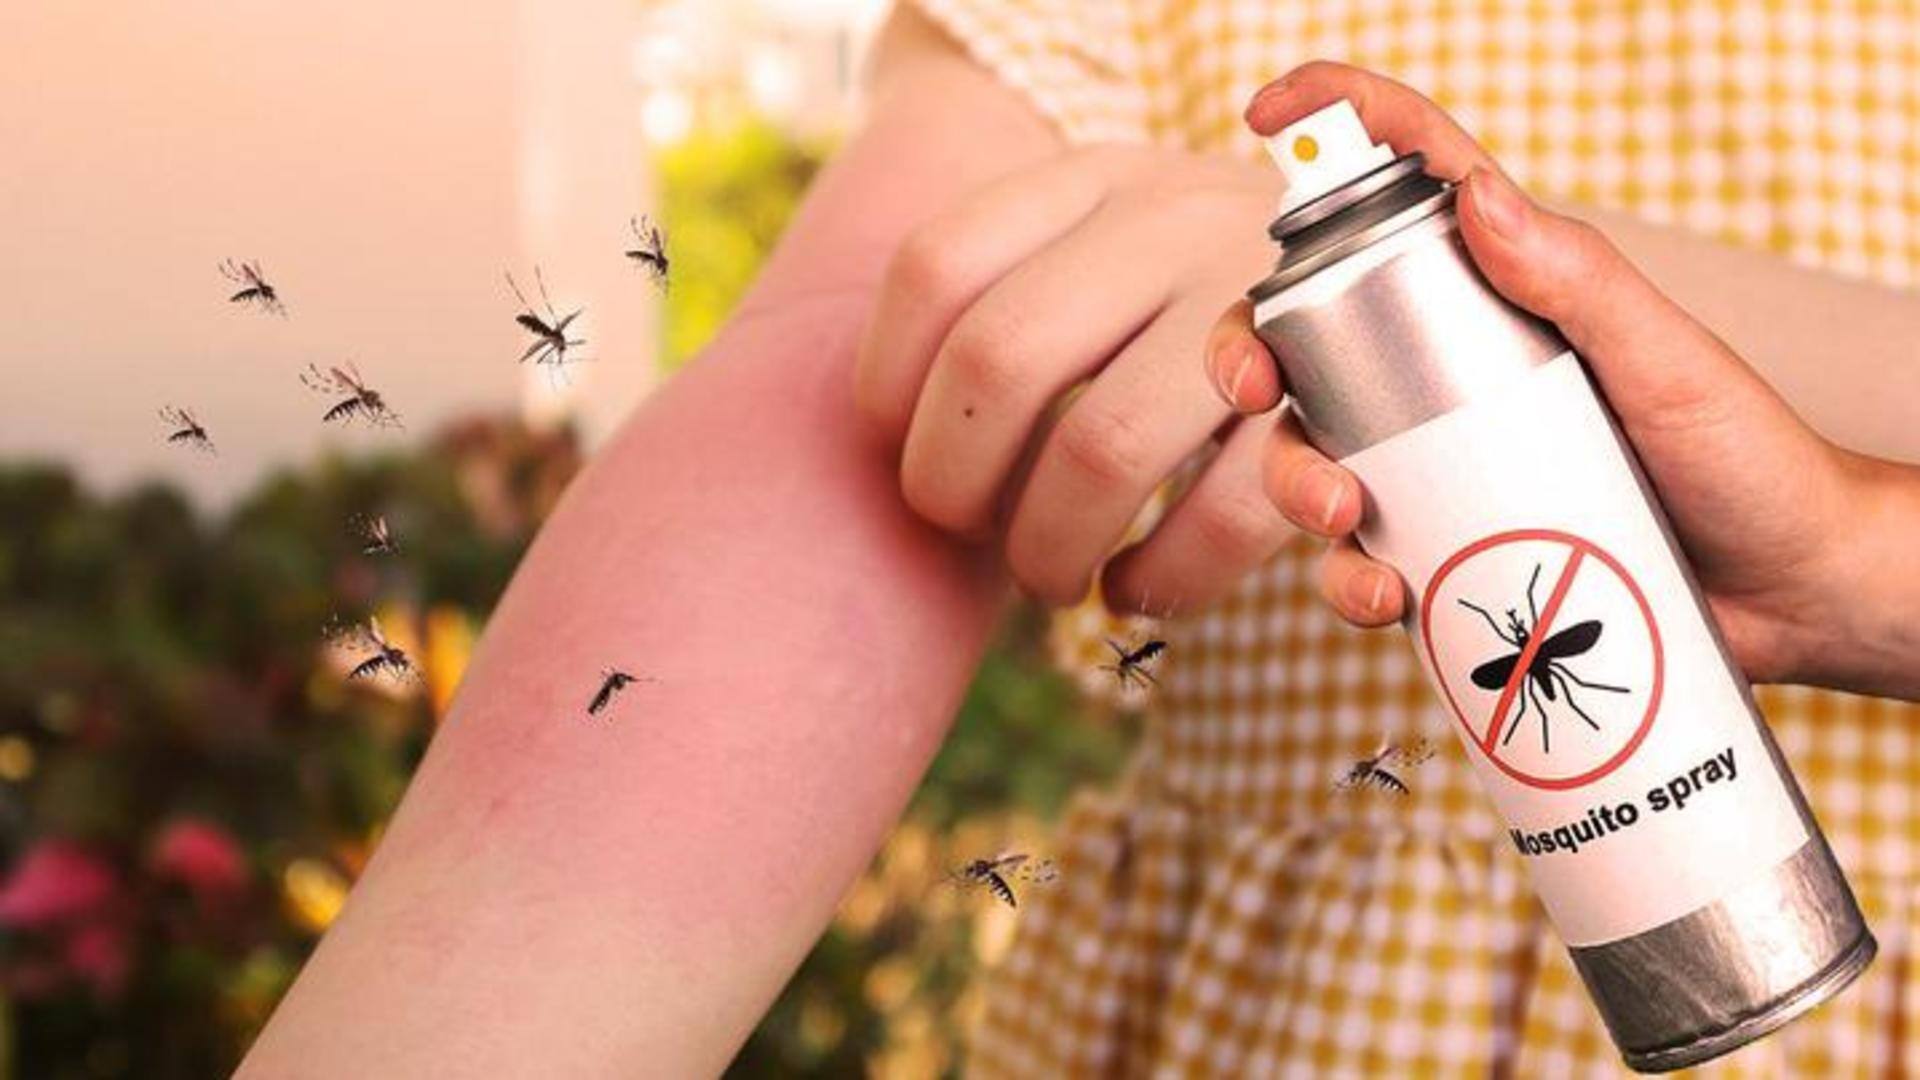 These homemade mosquito repellent sprays actually work